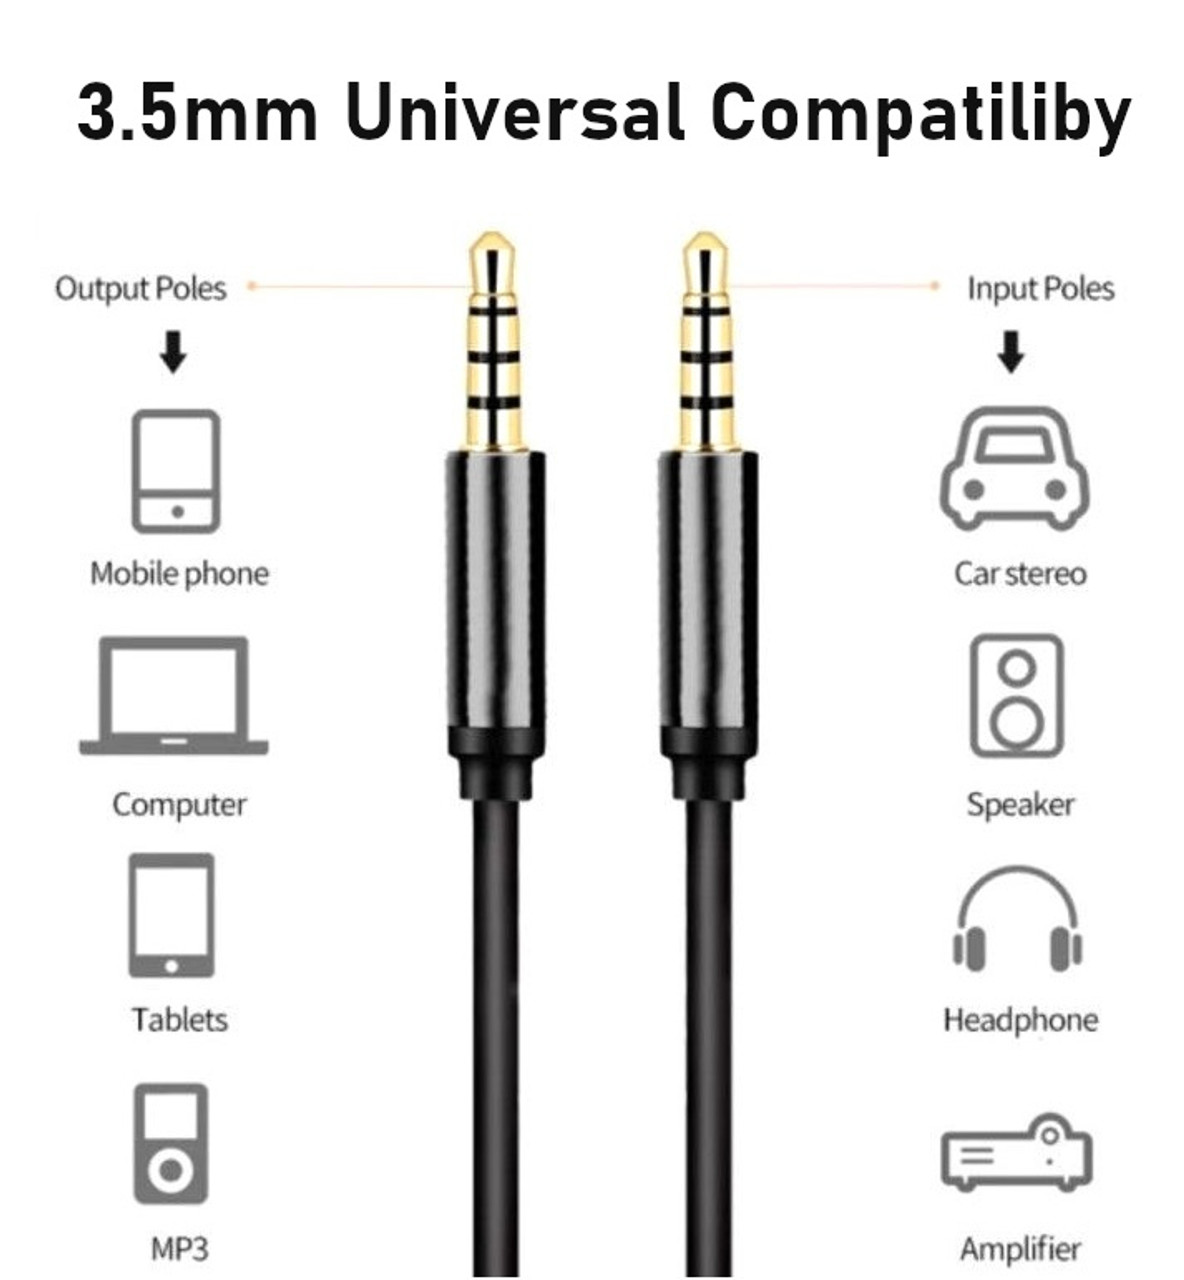 Premium 3.5mm AUX Cable 4-Pole TRRS Stereo Audio Microphone Jack Male to Male Line-in Connection M/M Extension Cord 1.2M JH